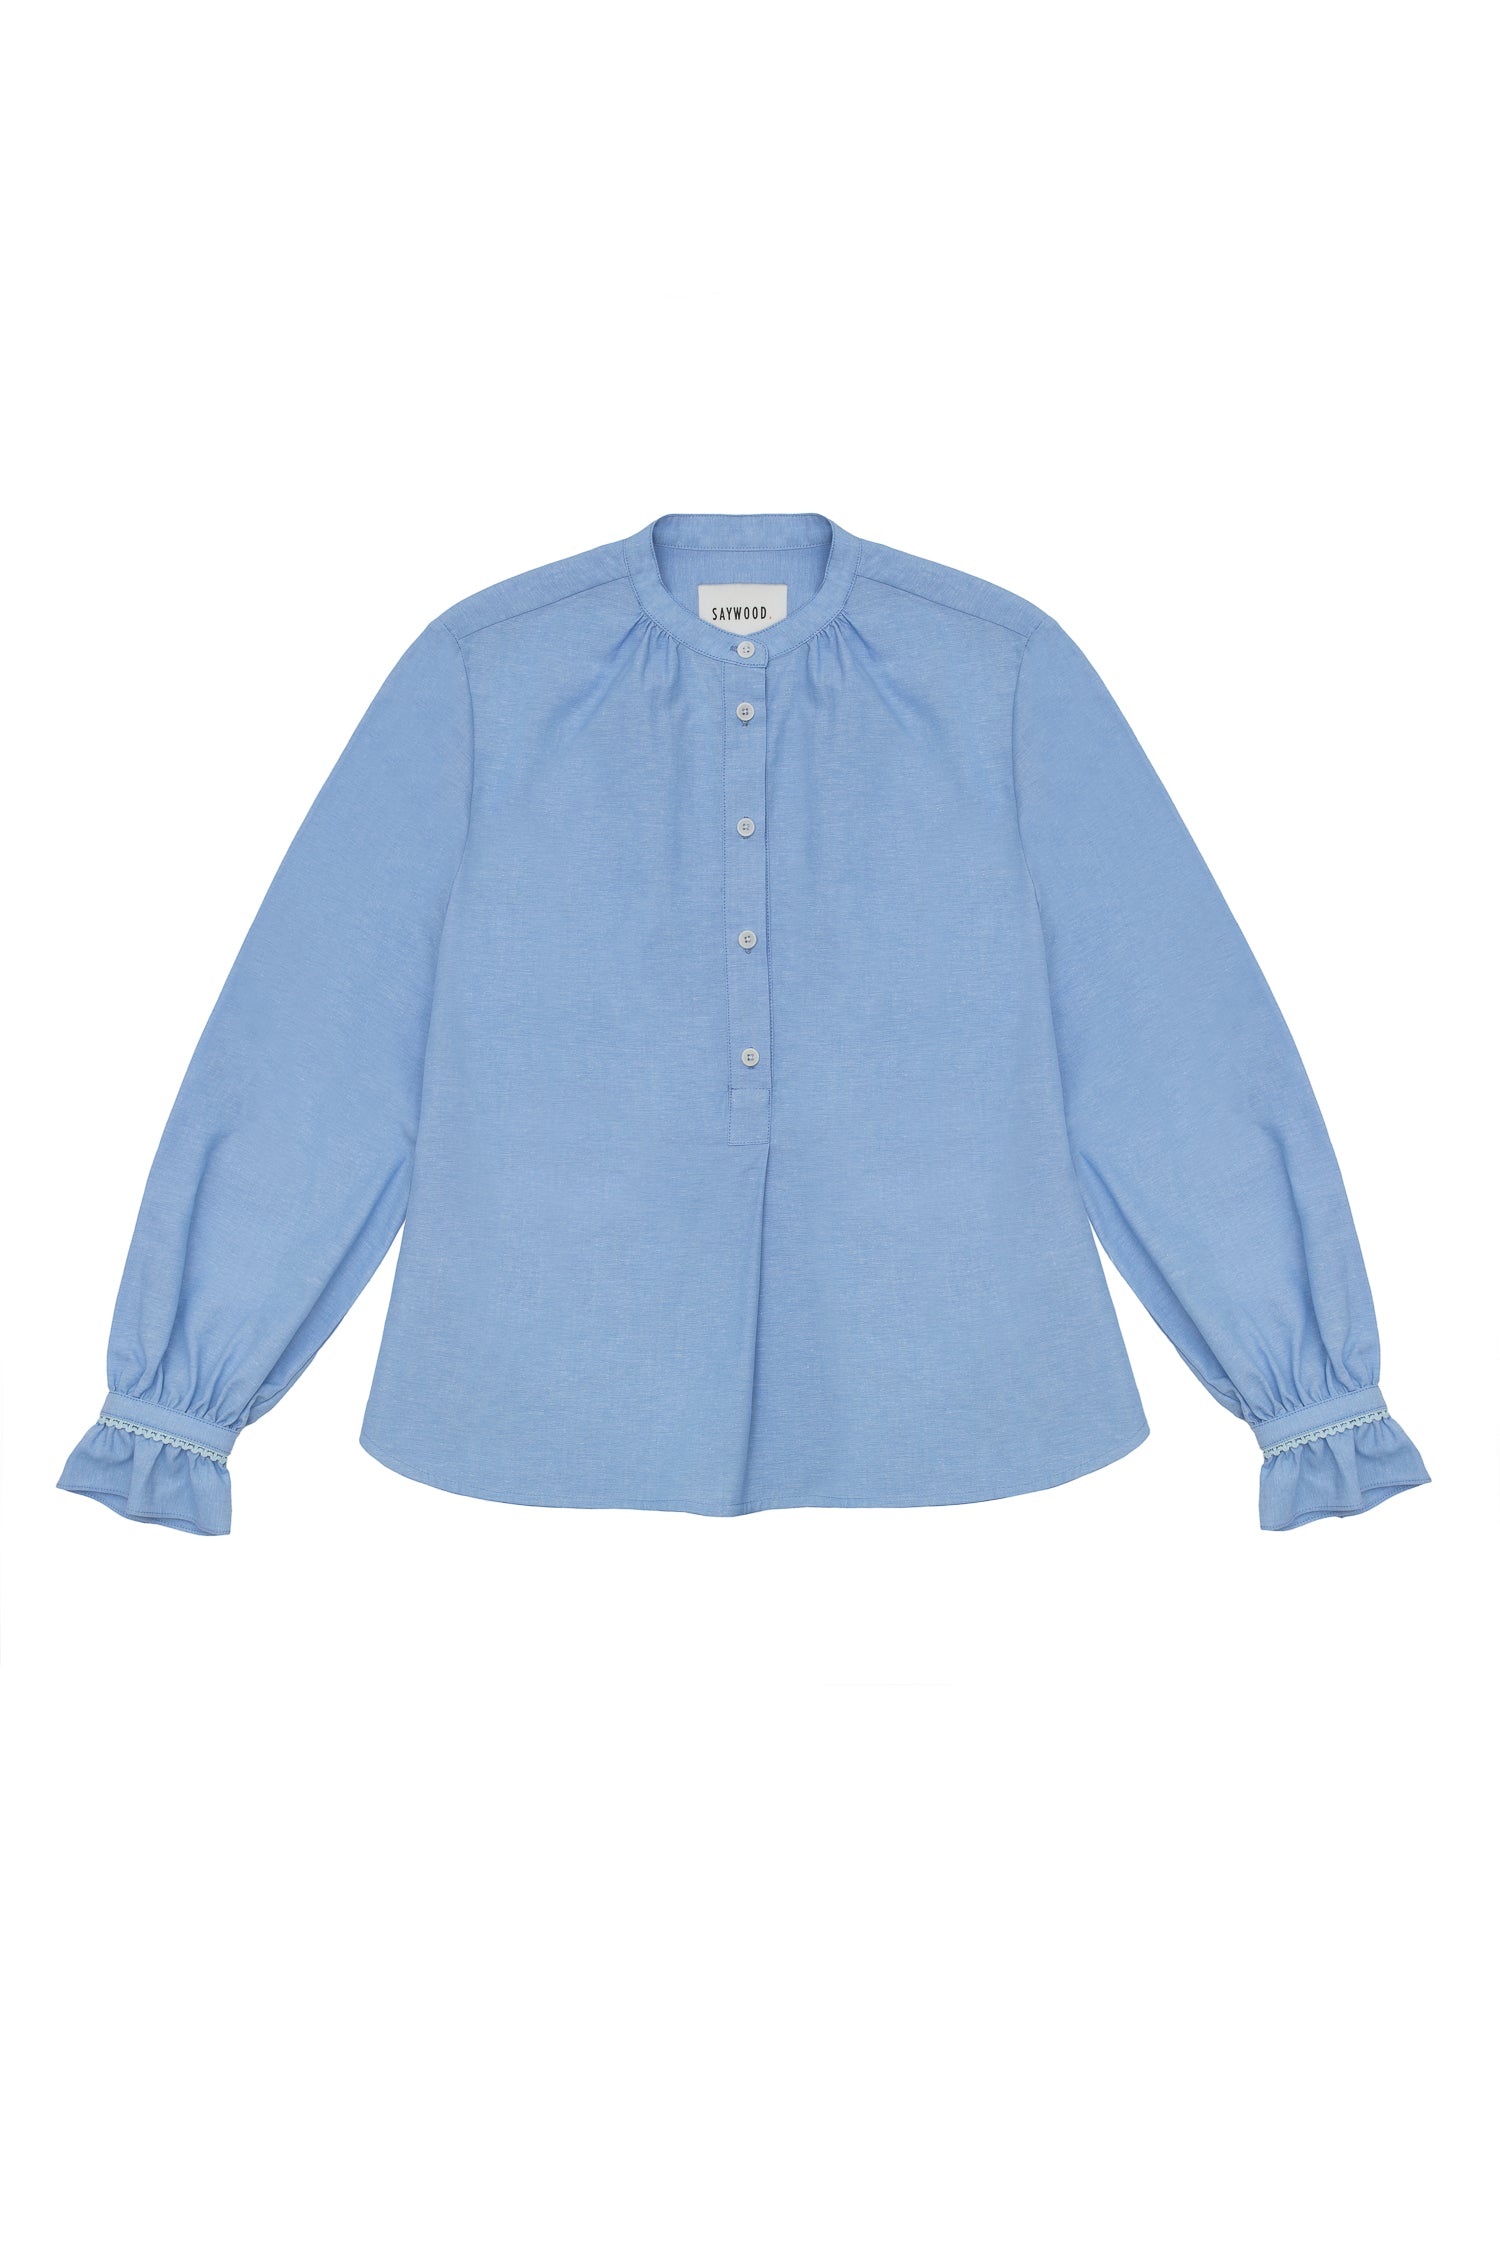 Womens Pale Blue Blouse, A-line shape with Gathered Neck and Frill cuffs. Marie Blouse by Saywood in pale blue recycled cotton